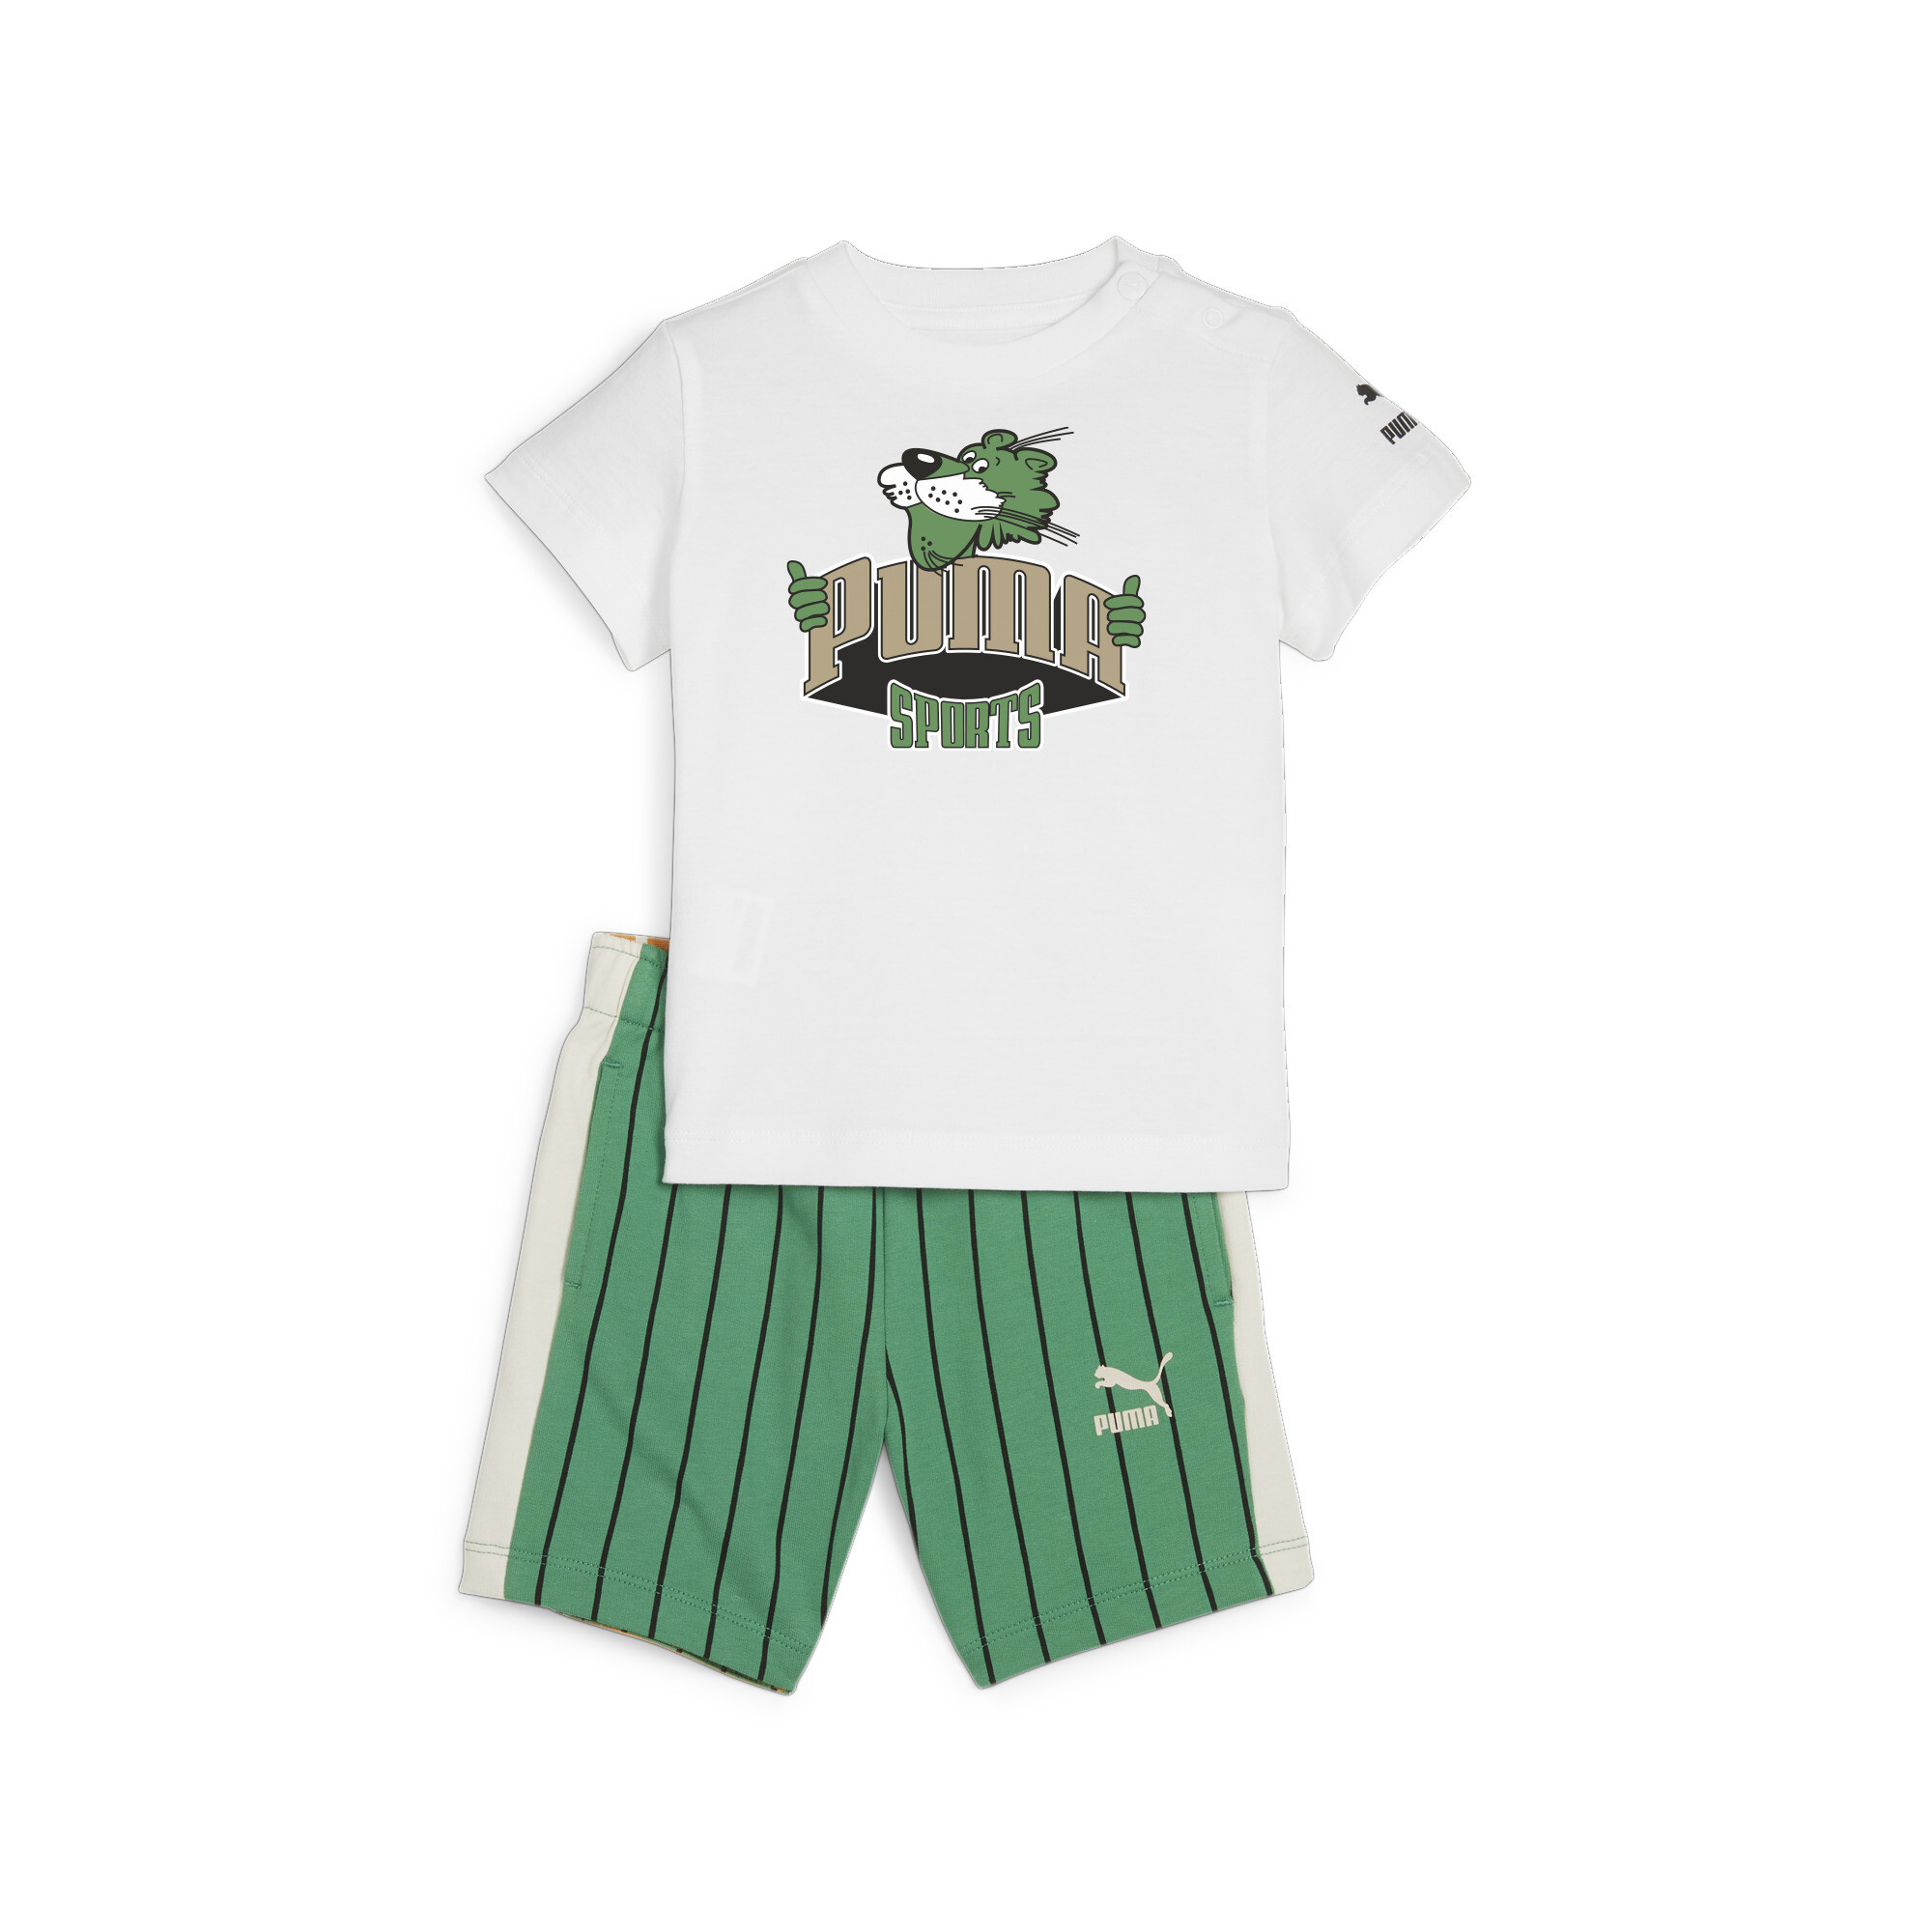 Kids' PUMA MINICATS FANBASE Toddlers' Set In White, Size 6-9 Months